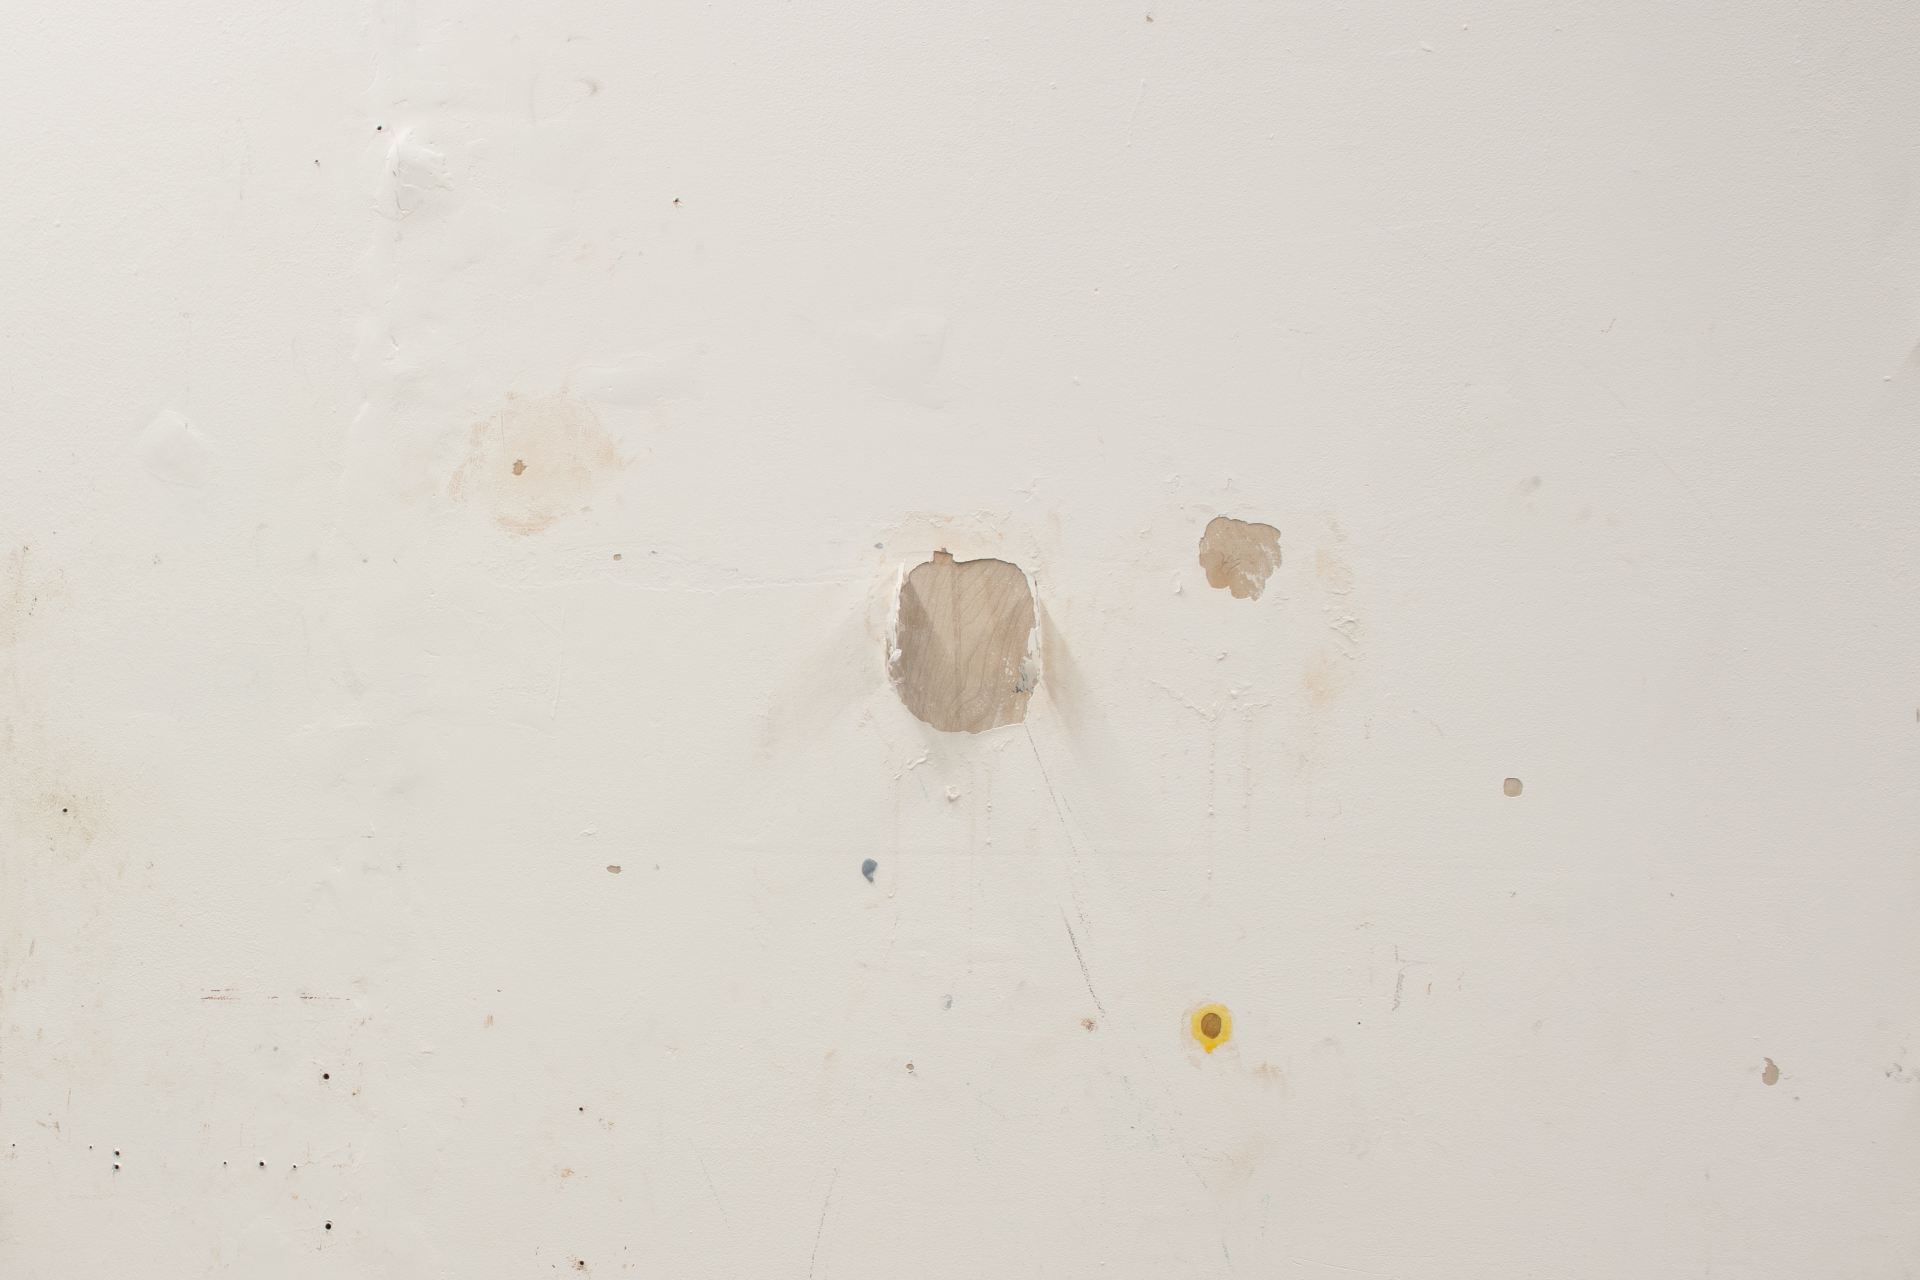 An image of some chipped paint on a white wall.